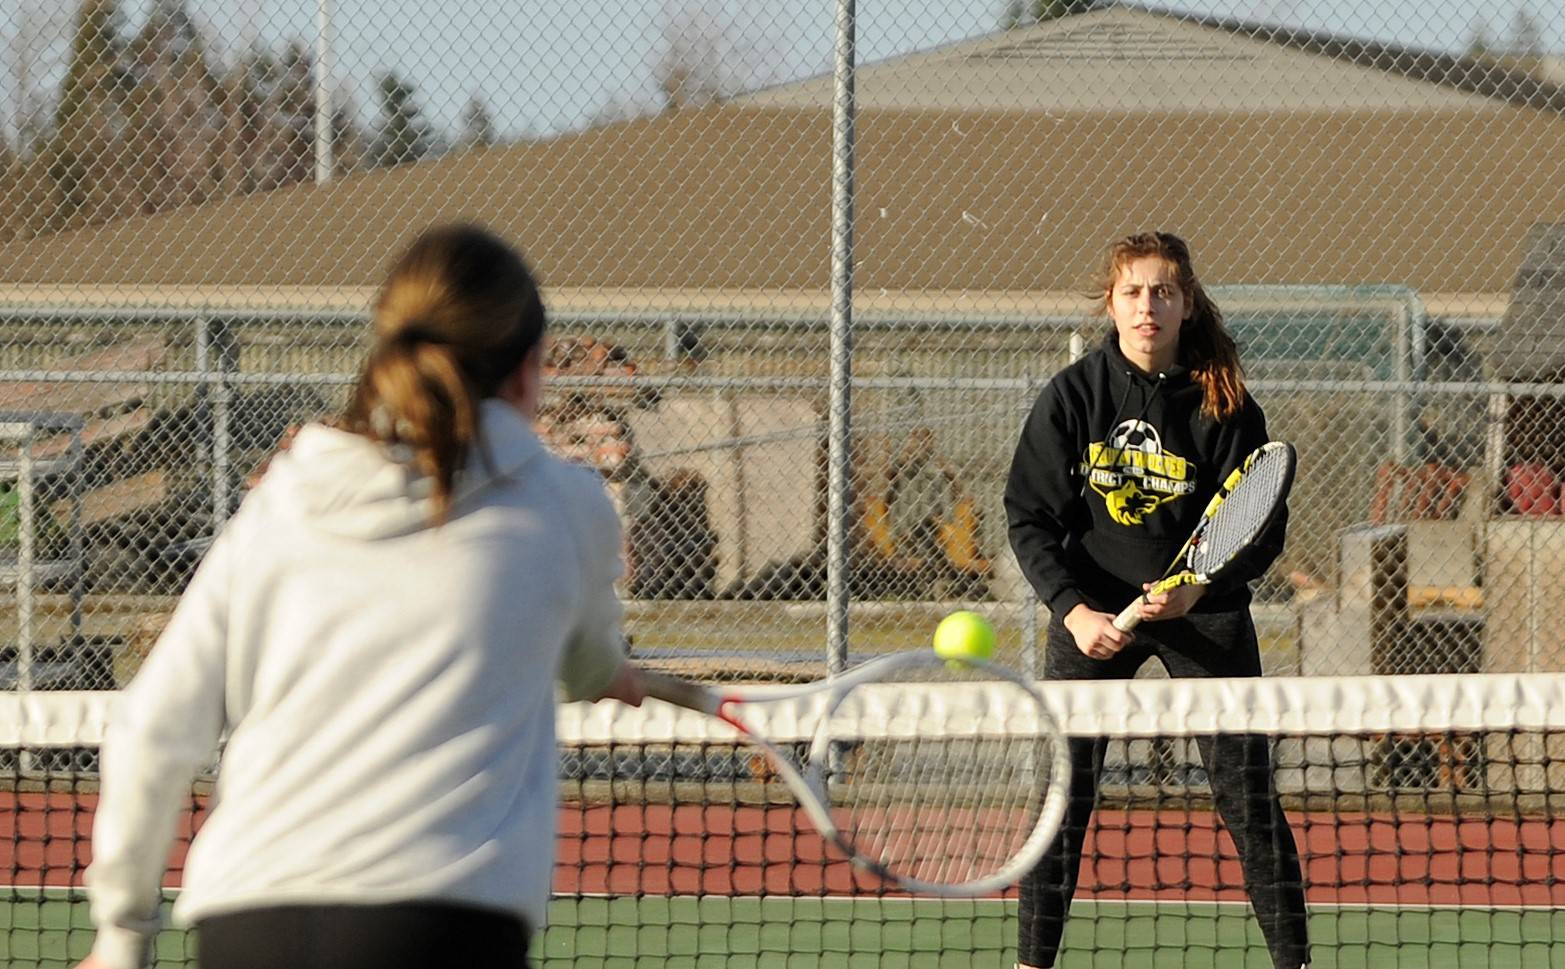 Spring sports preview: Defending state champ SHS girls tennis team challenged by roster turnover